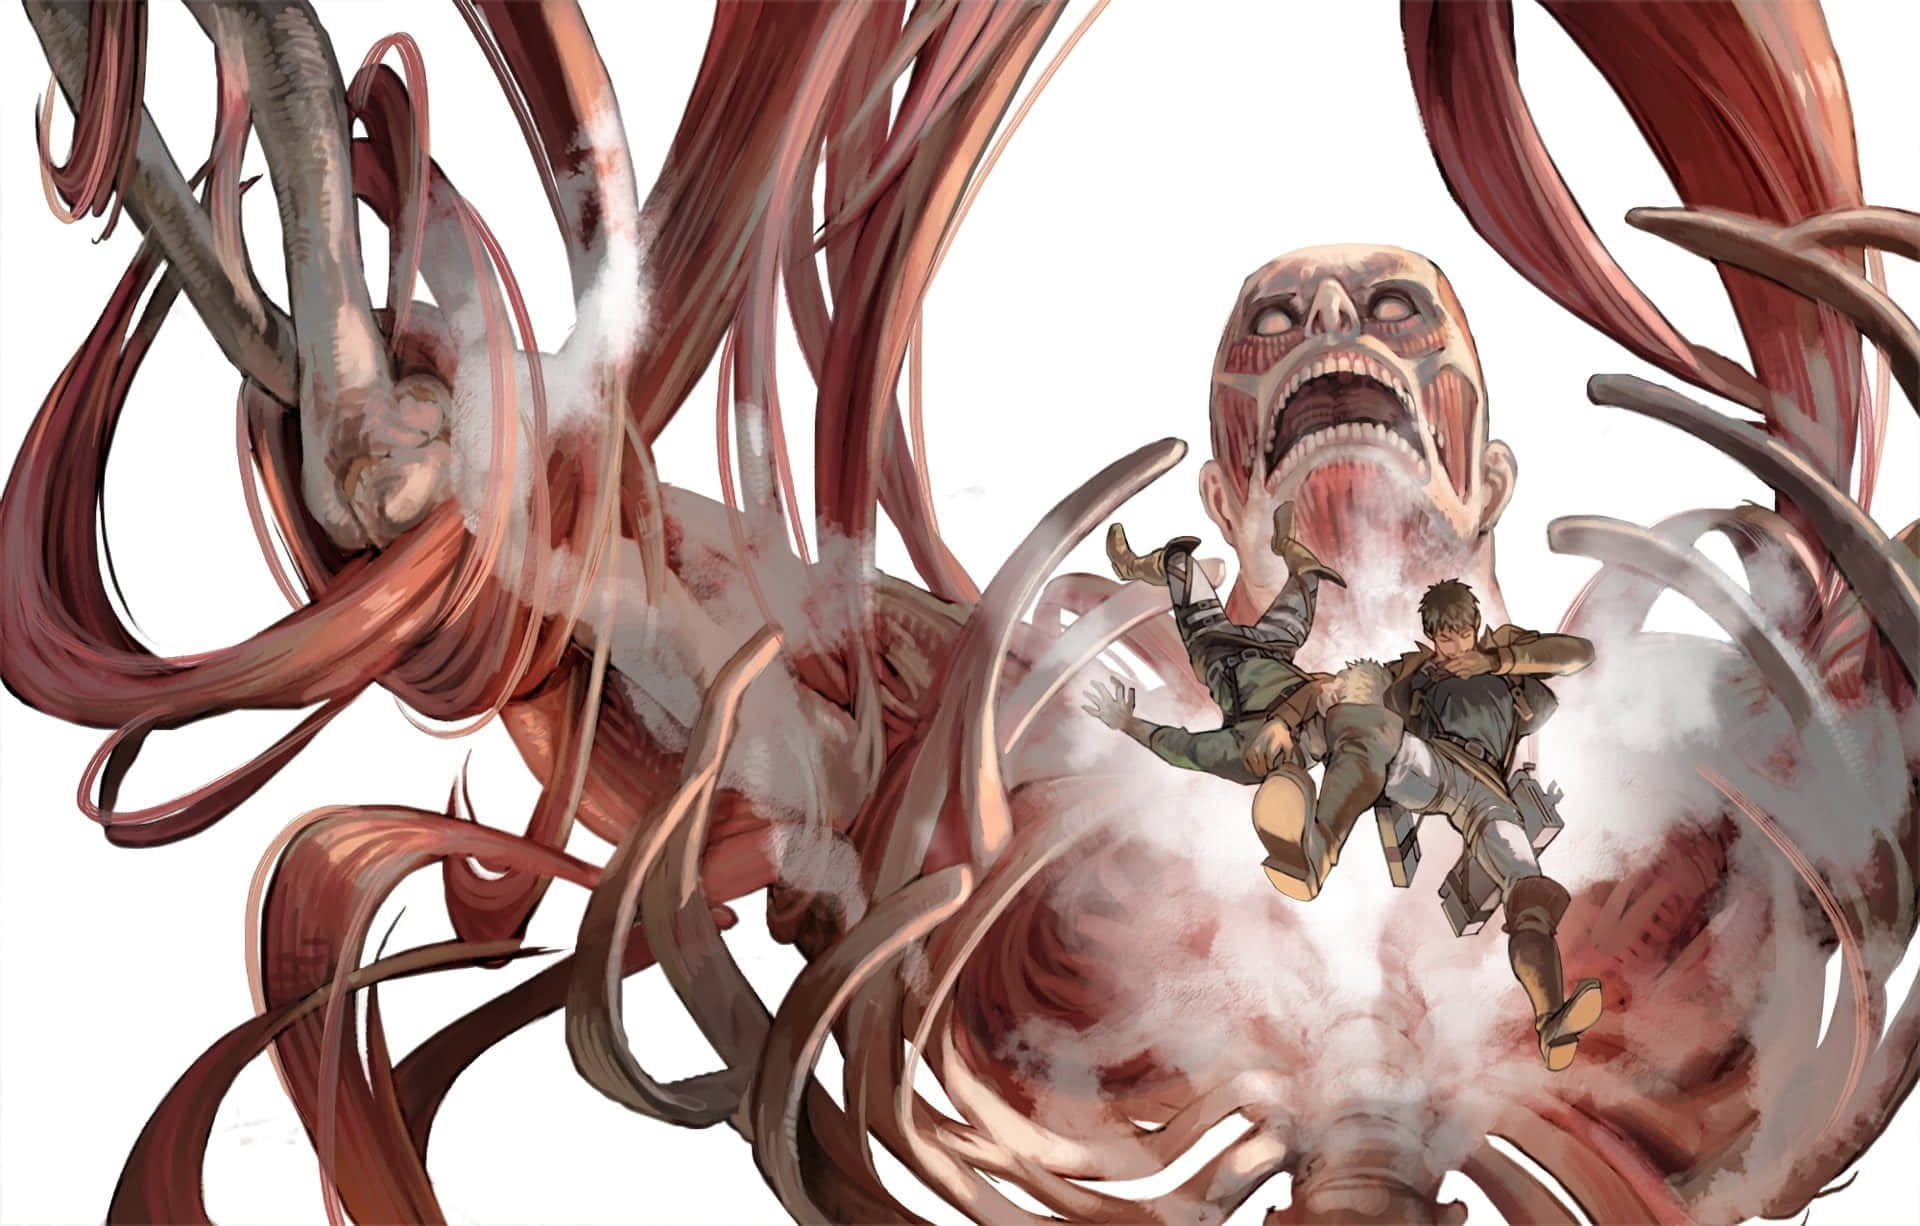 Join the Scout Regiment in Attack on Titan Season 2 Wallpaper